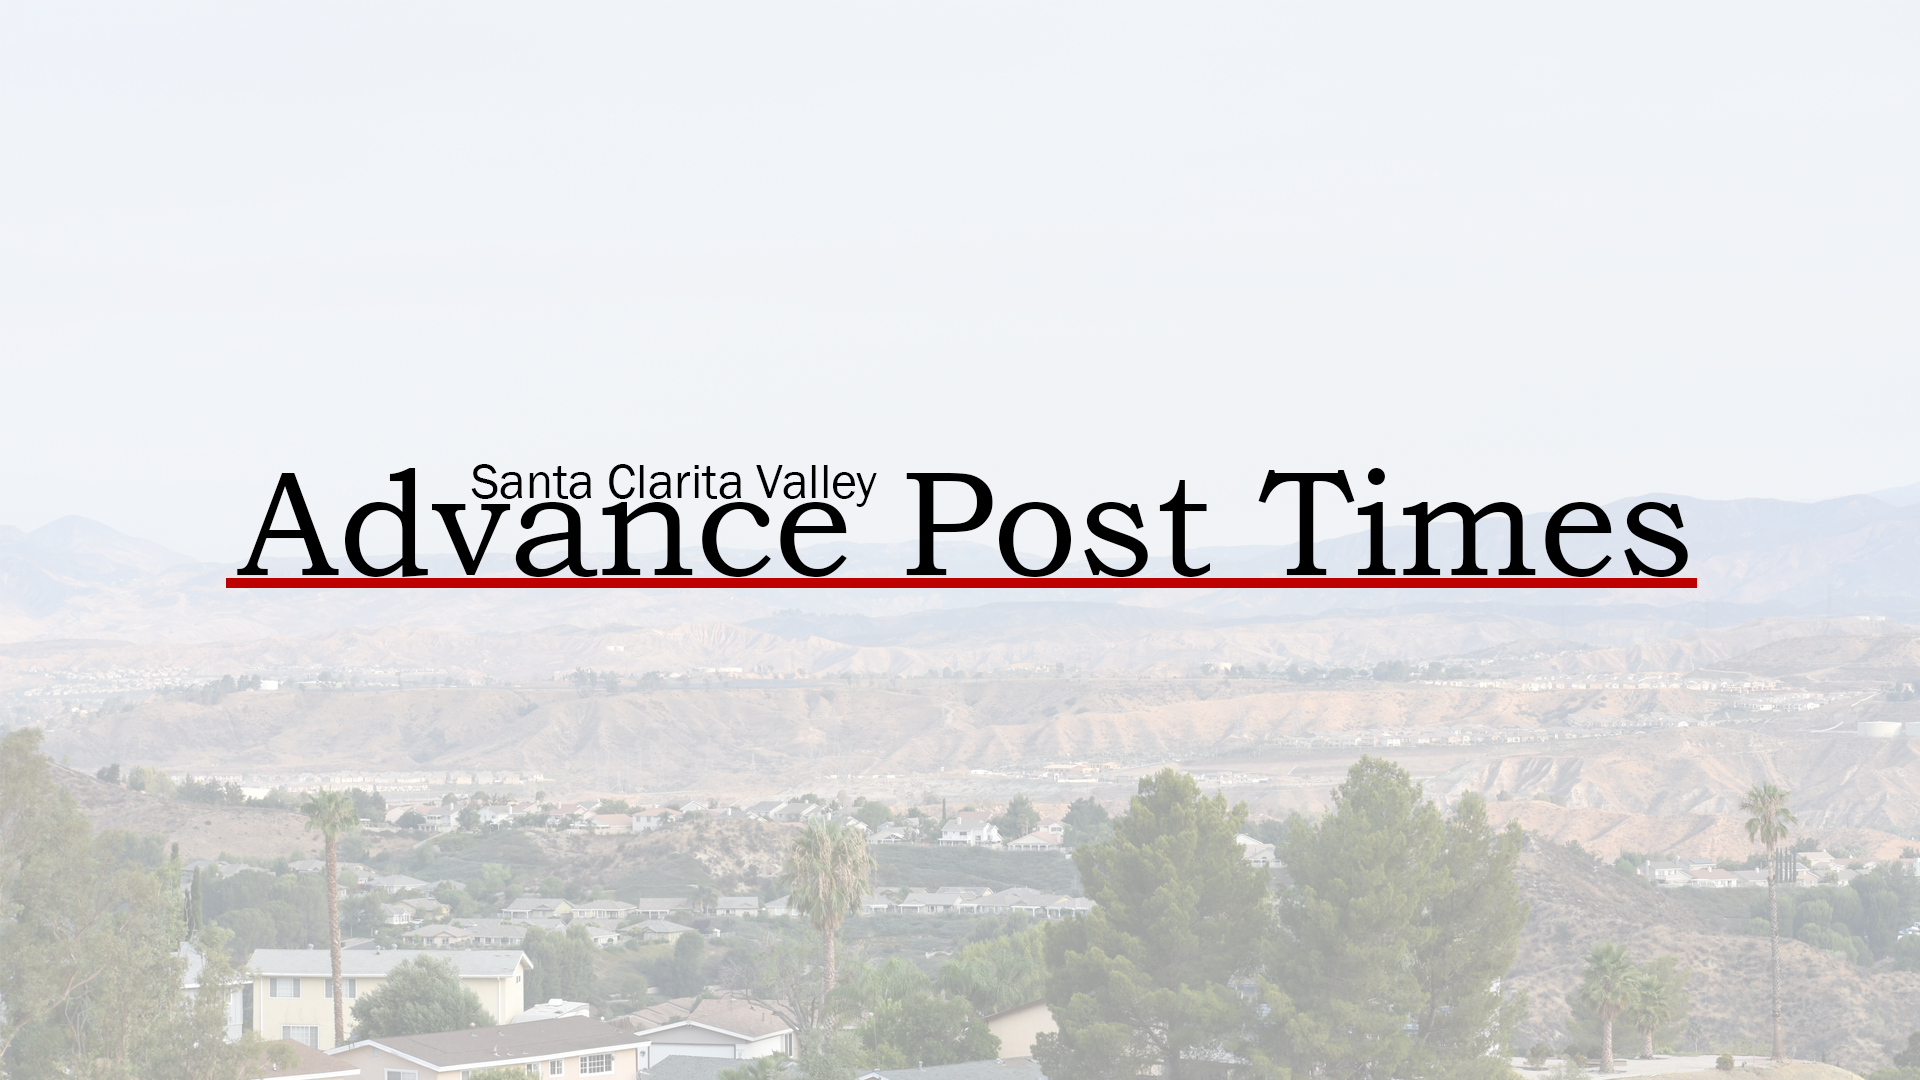 Welcome to Advance Post Times!